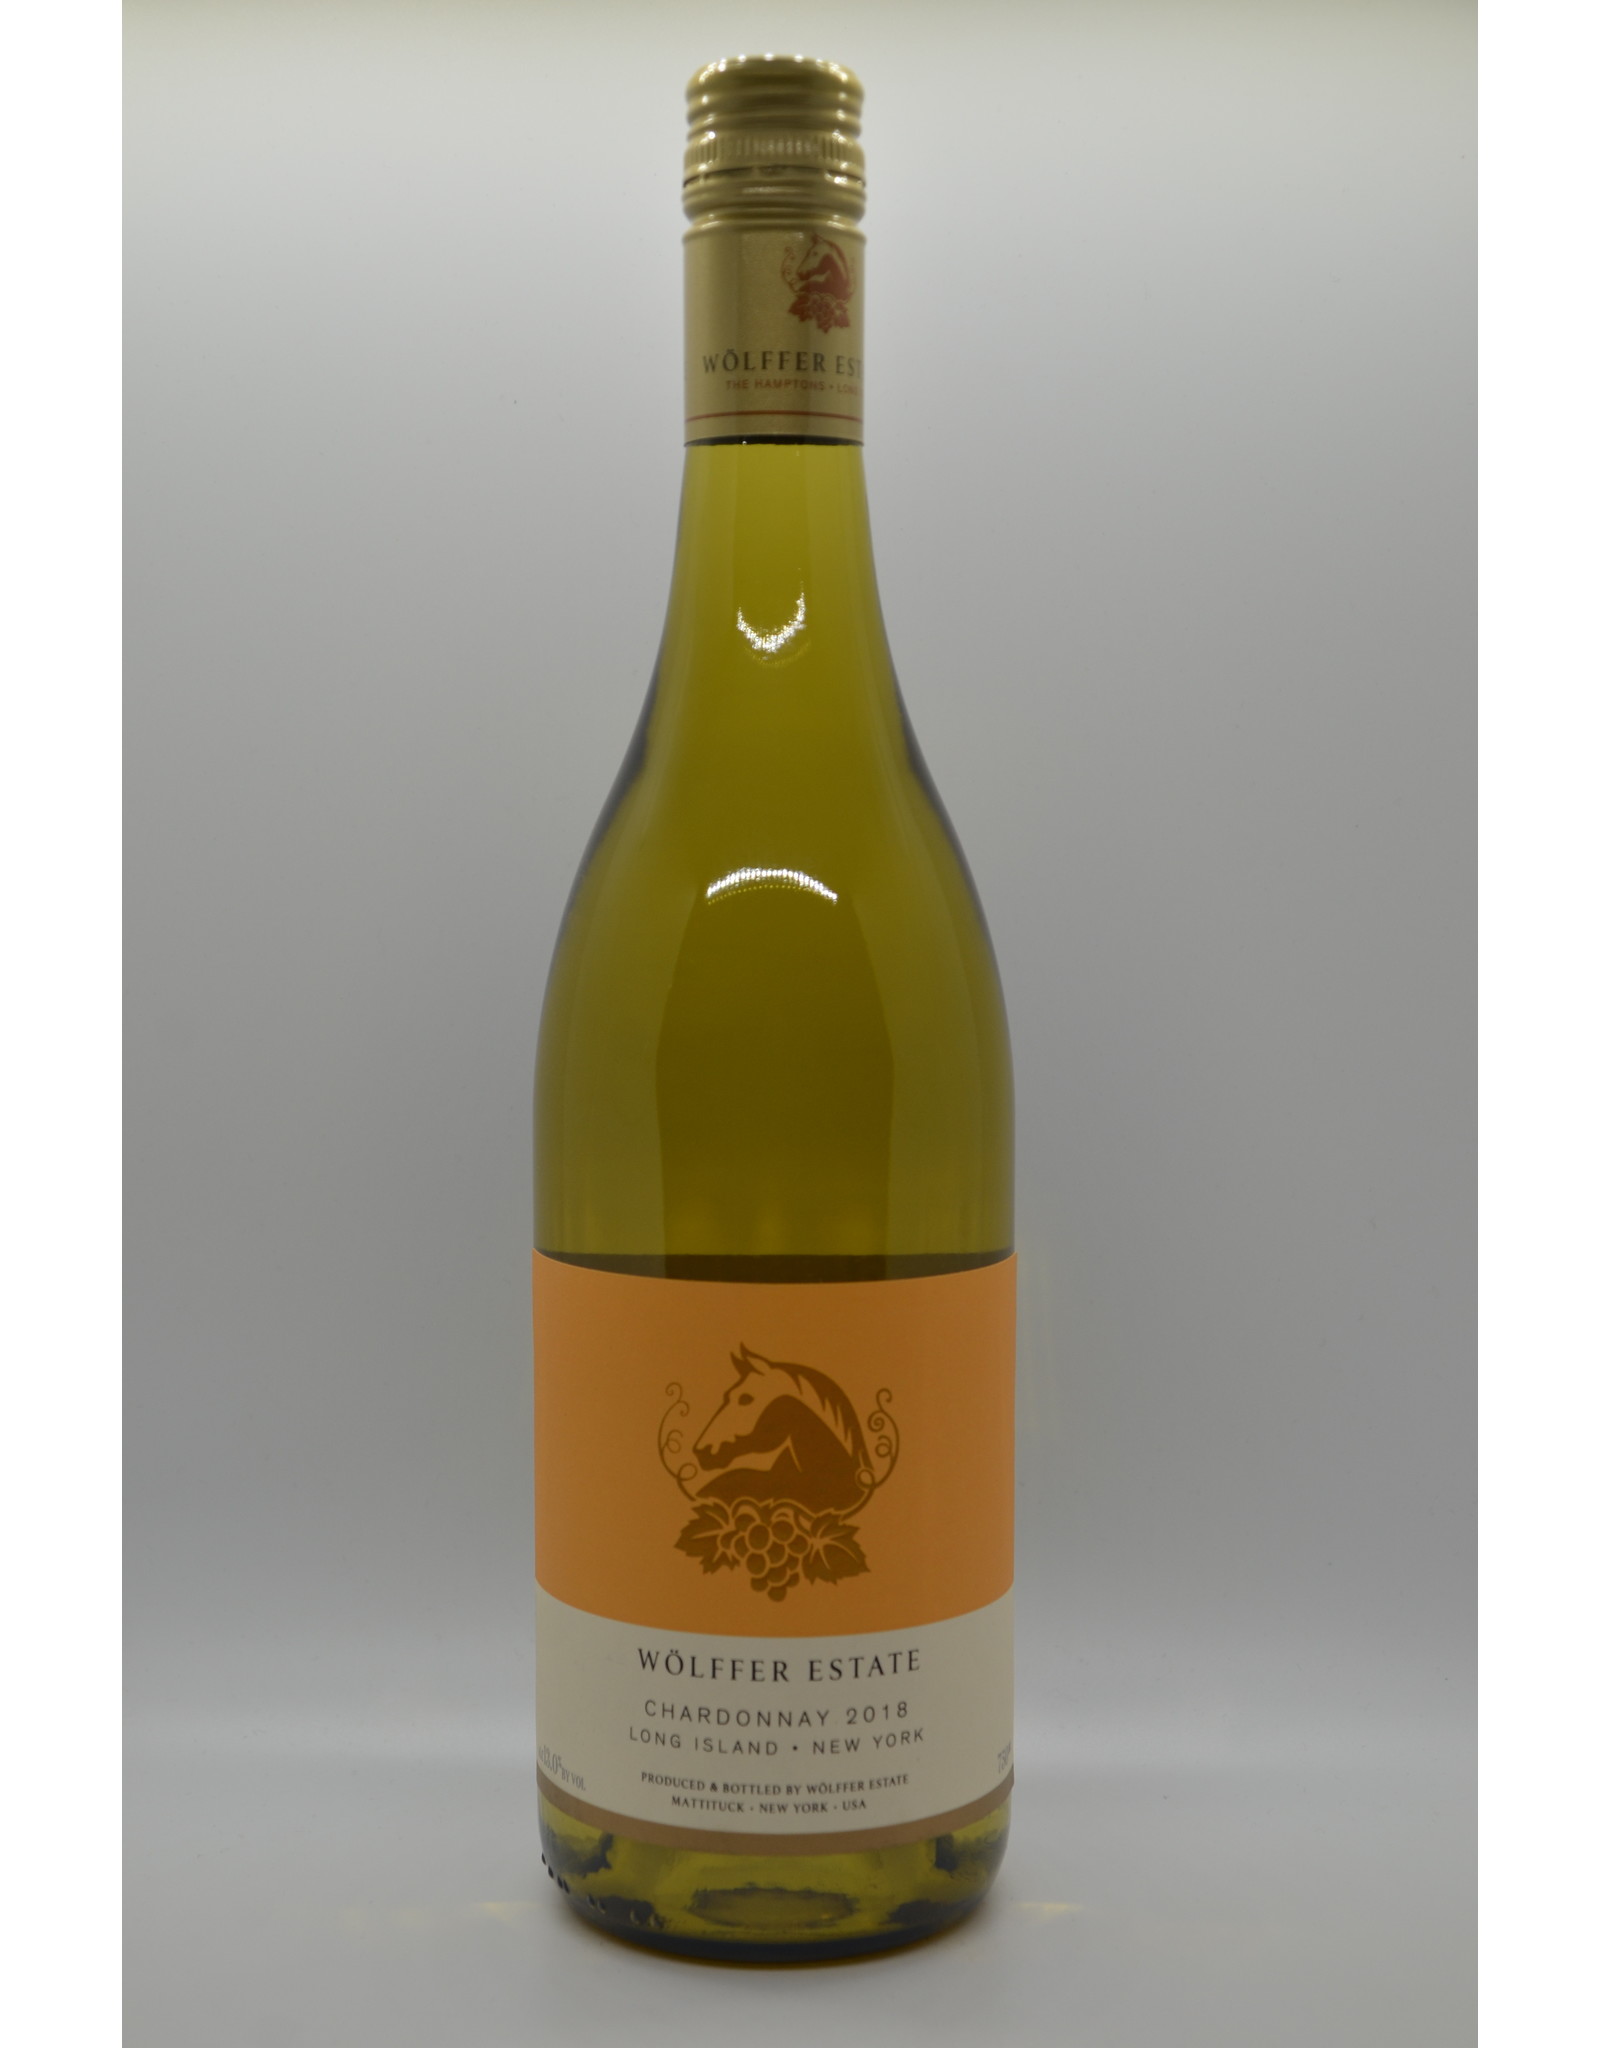 USA Wolffer Estate The Grapes of Roth Chardonnay